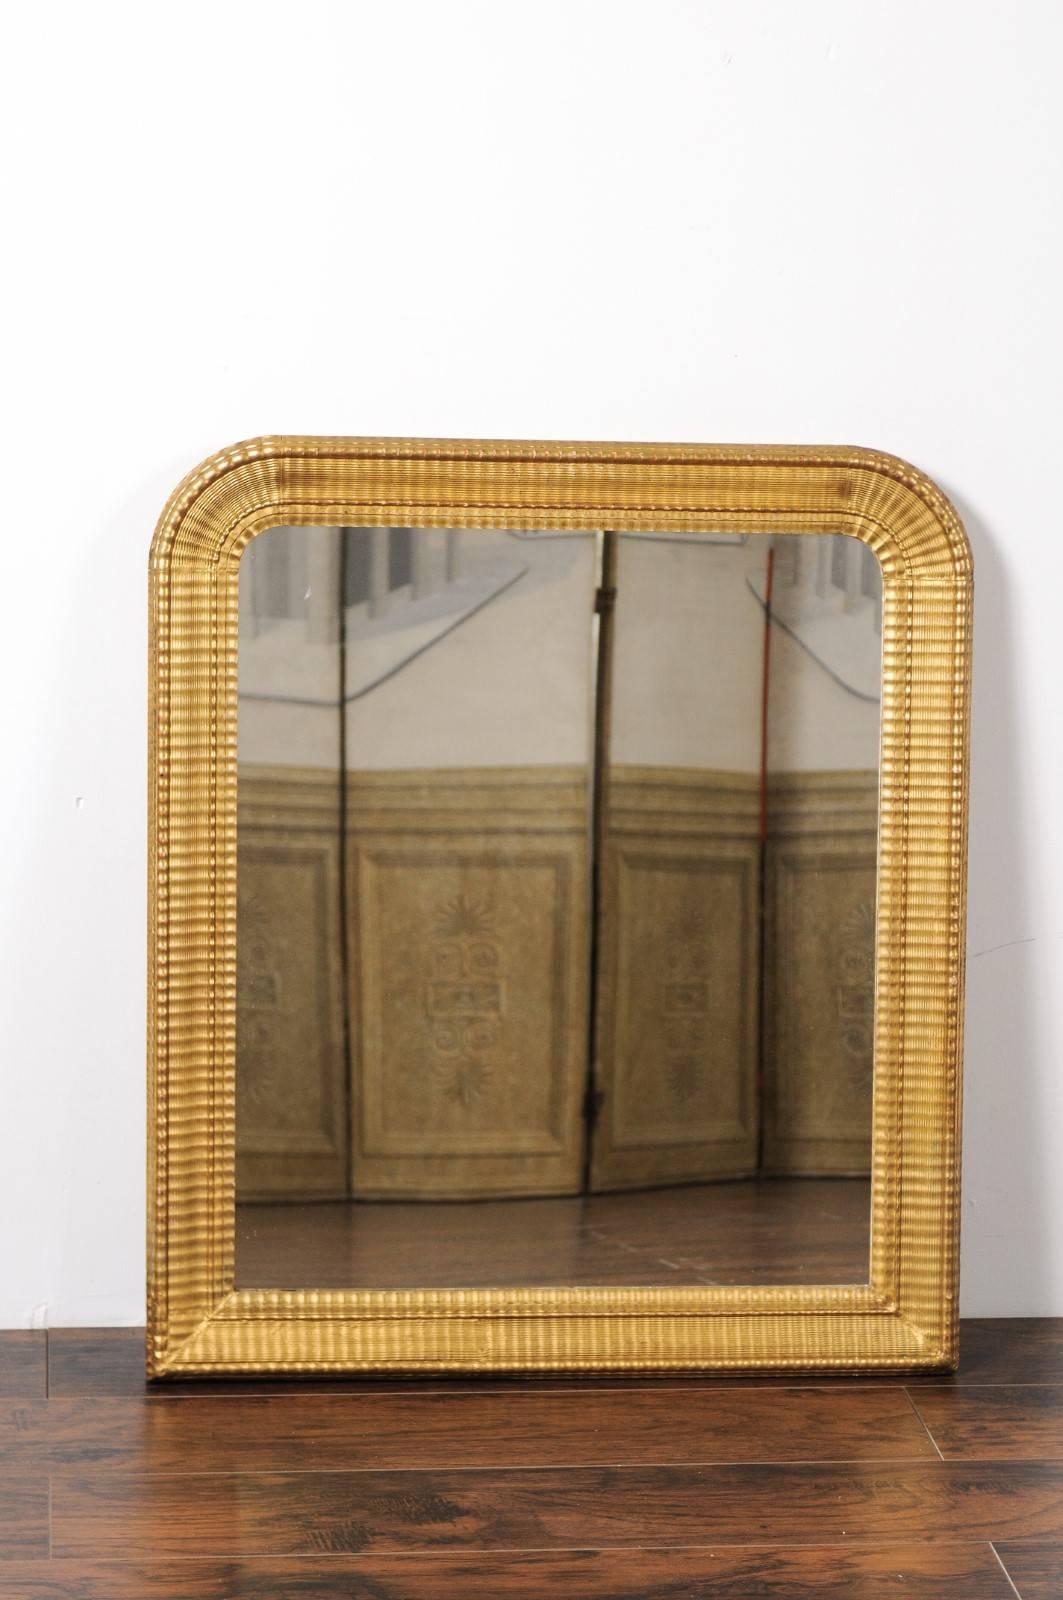 A French Louis-Philippe inspired giltwood mirror from the early 20th century with ridged frame. This French mirror features an elegant silhouette, reminiscent of the Louis-Philippe era with its rounded corners at the top. This frame however, is